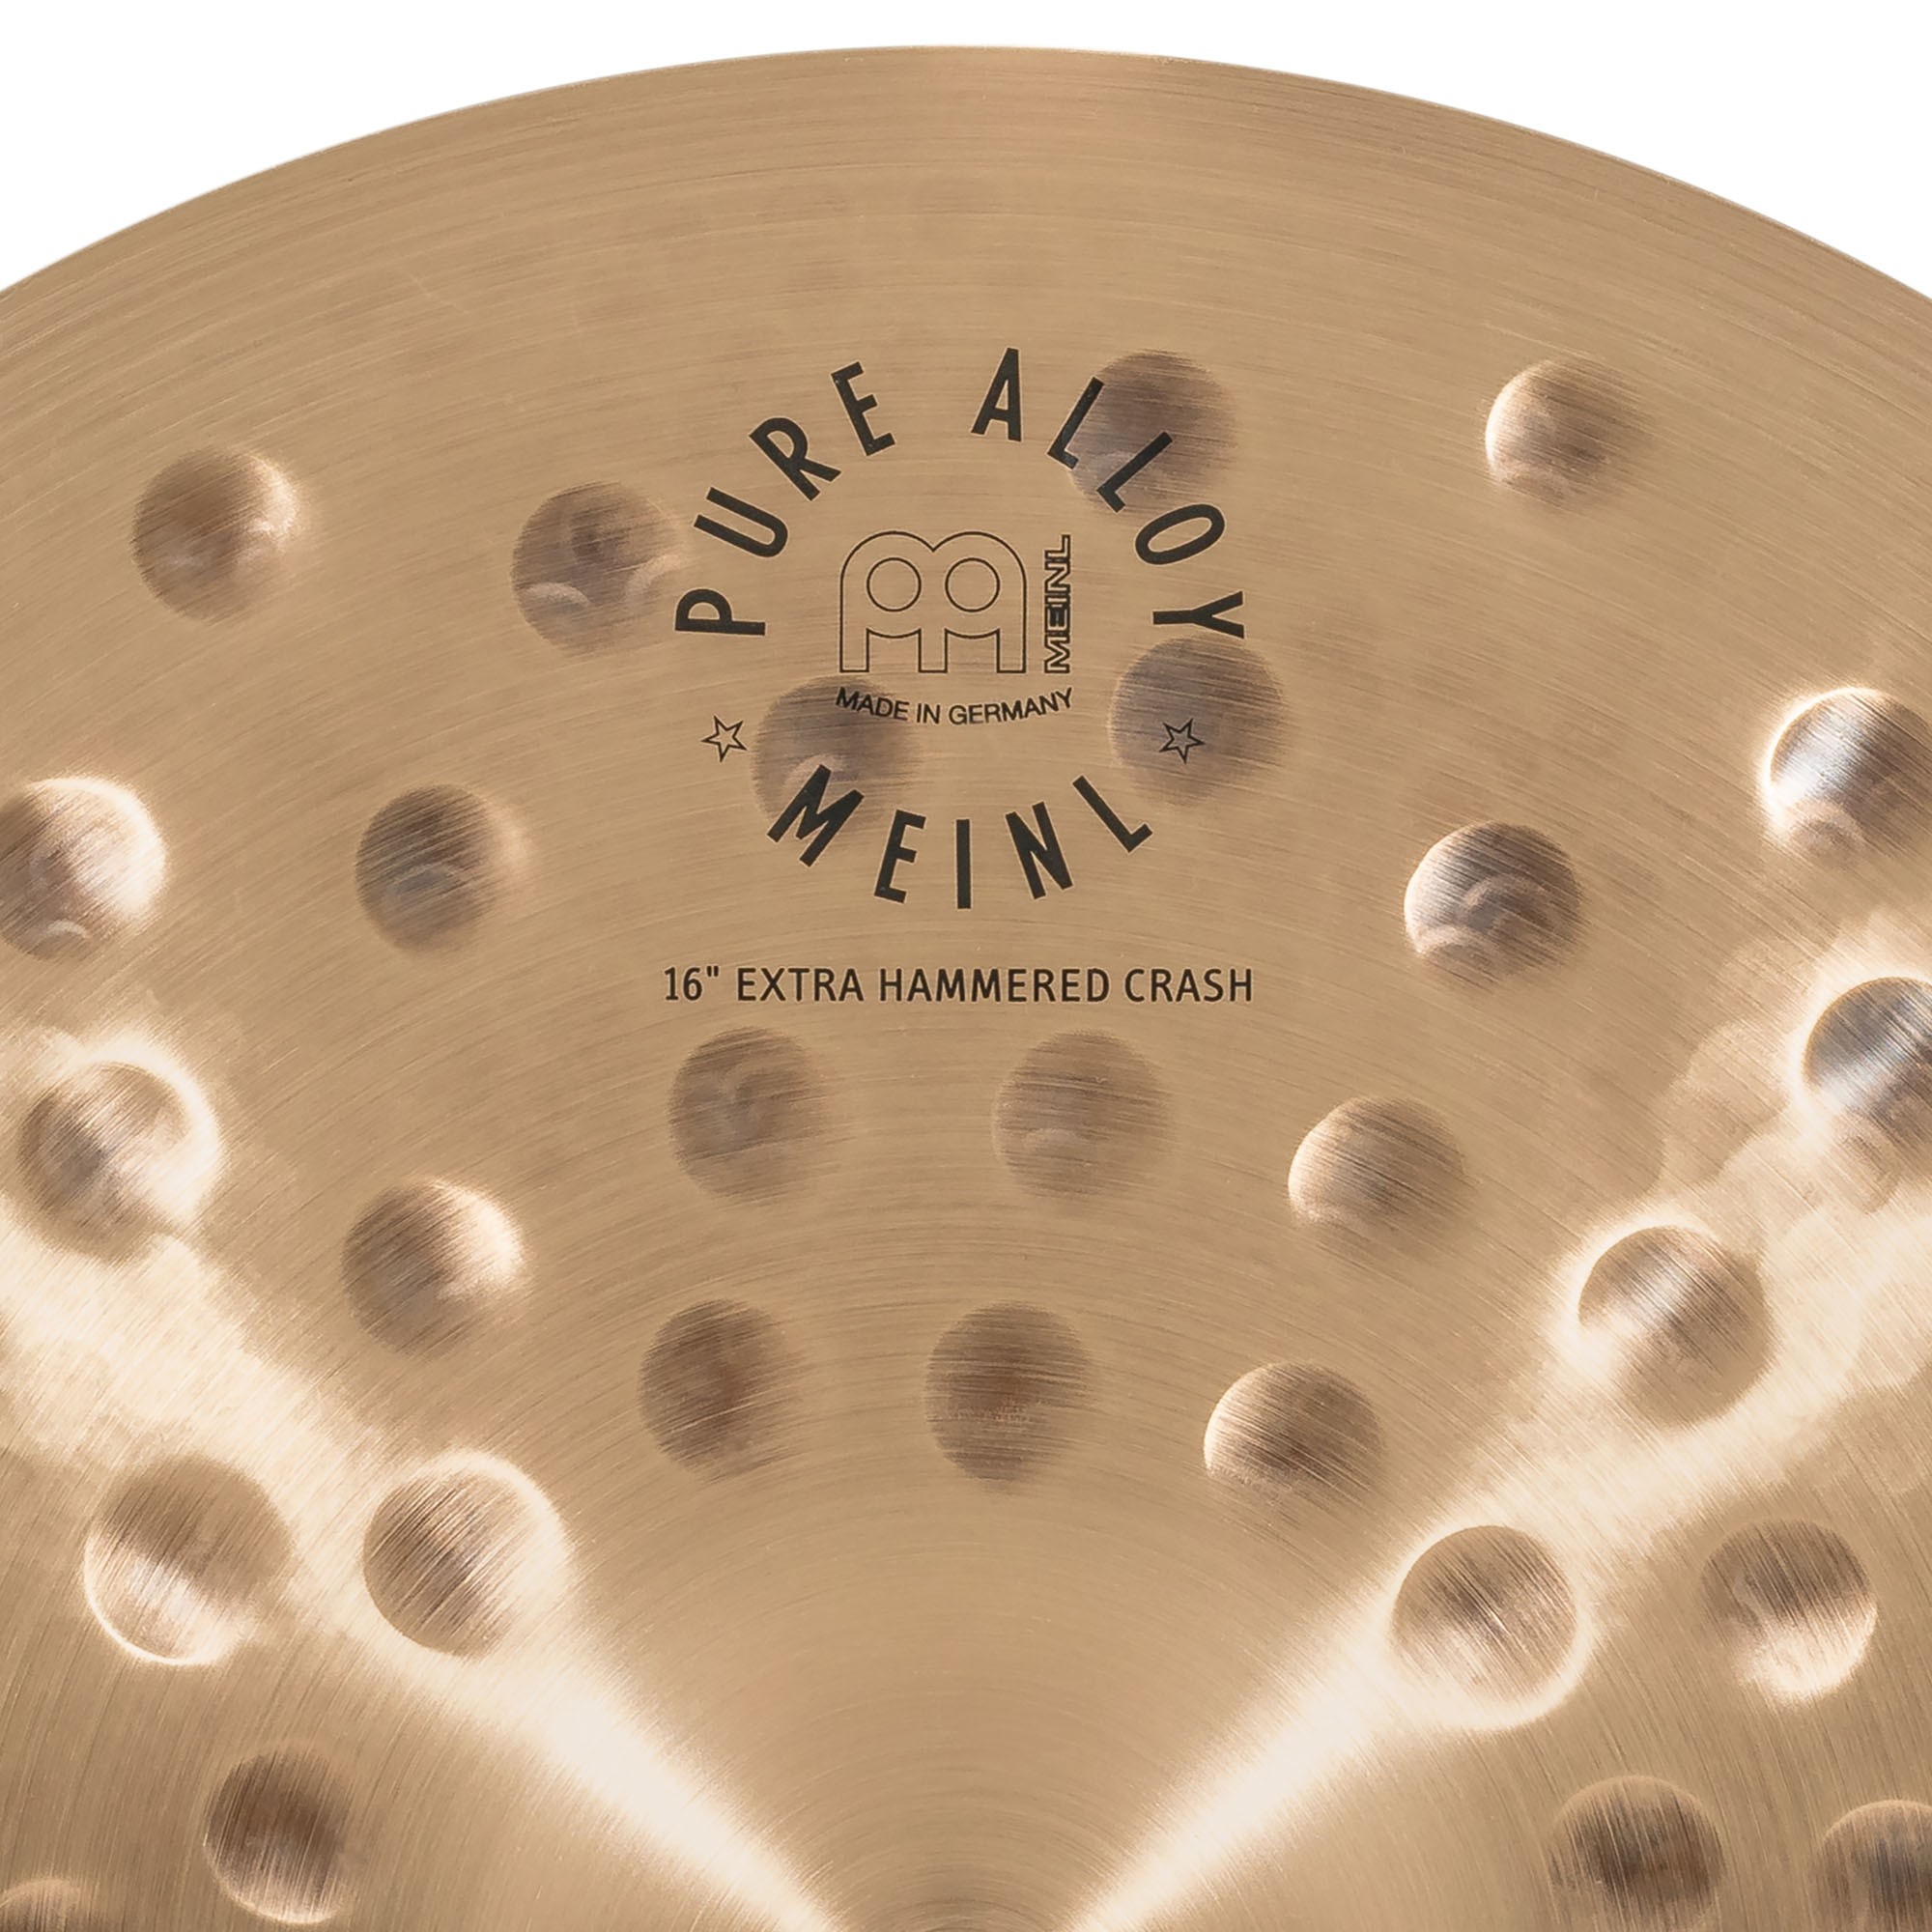 Meinl Pure Alloy 16" Extra Hammered Crash